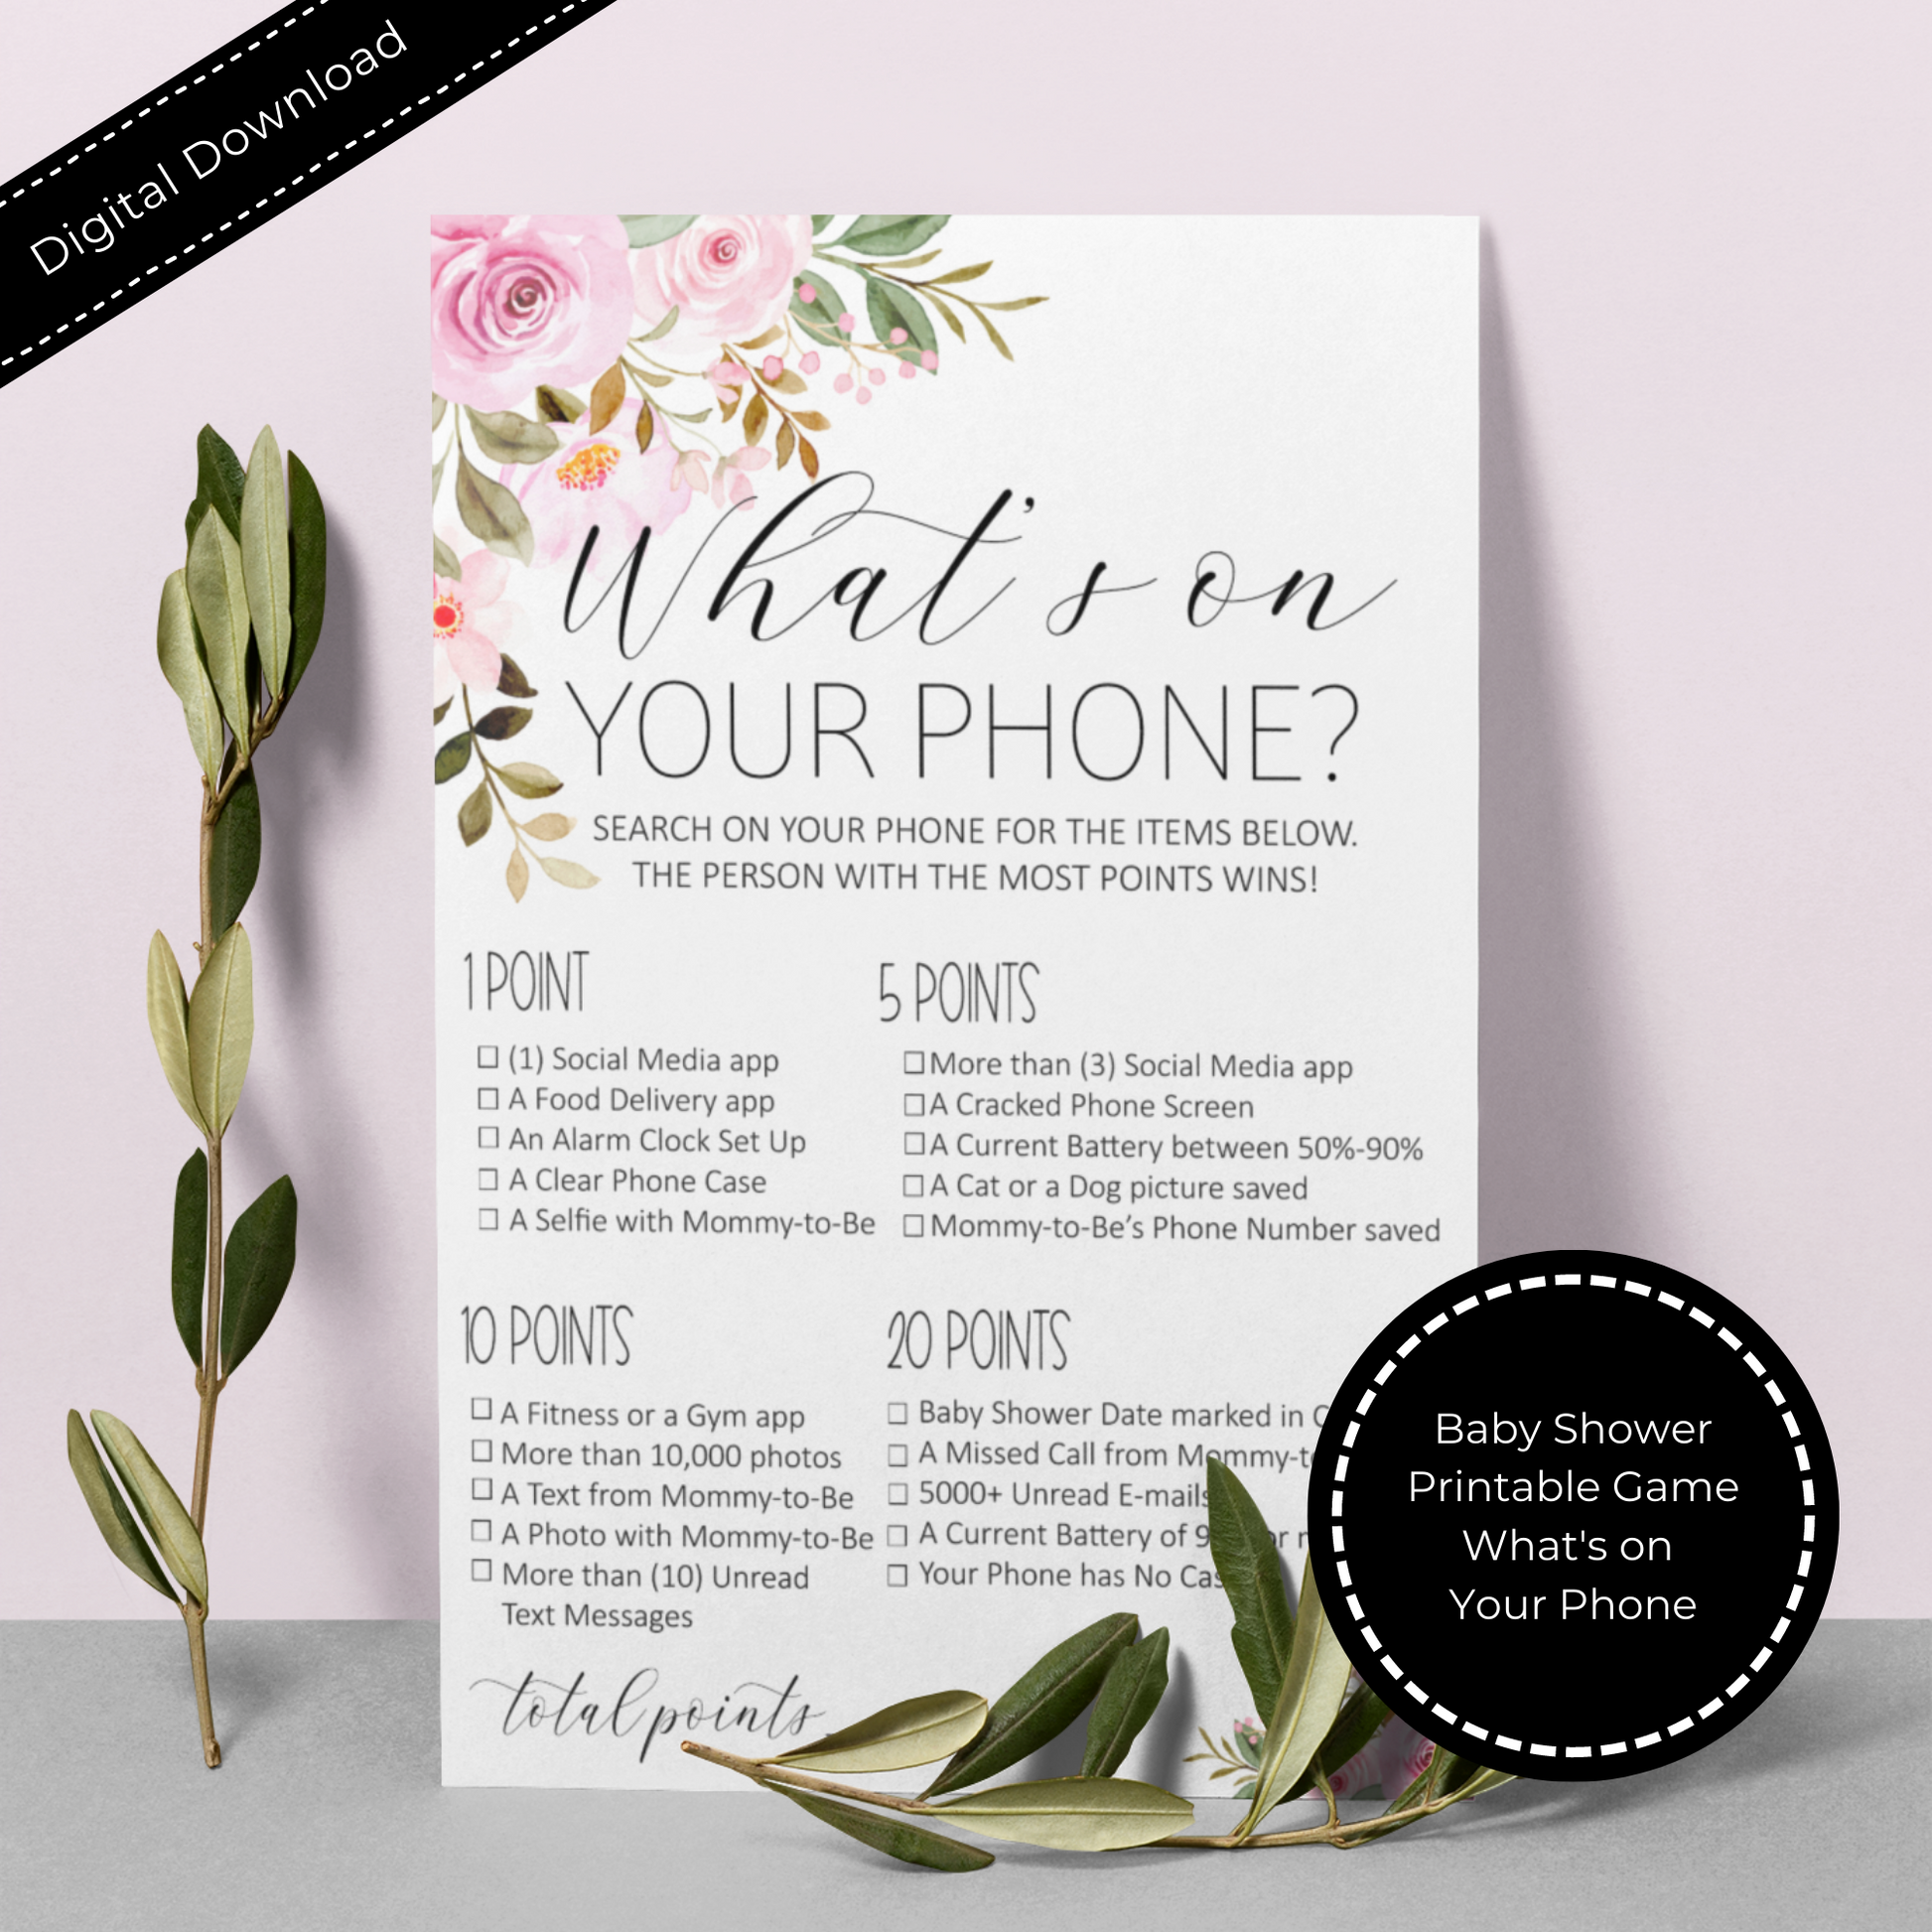 Whats On Your Phone Baby Shower Game Printable - Floral